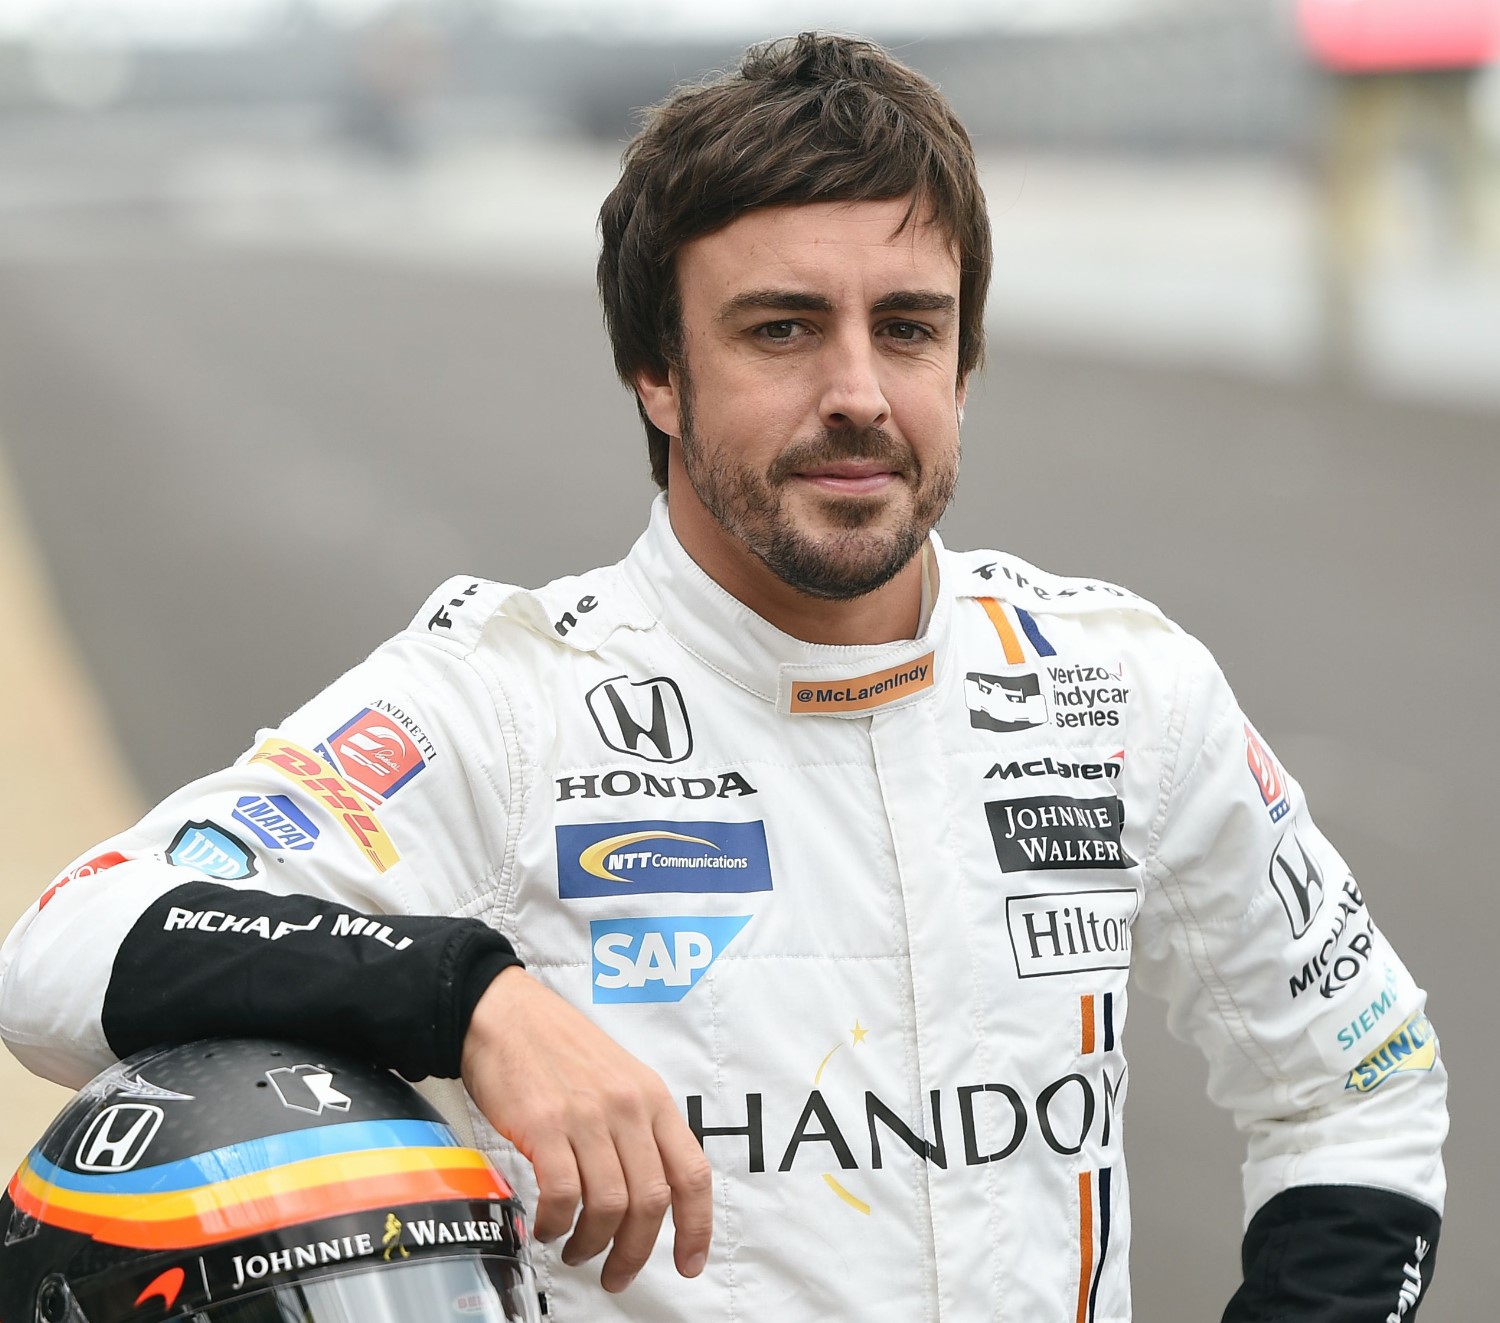 Alonso will be back at Indy with Andretti in 2020 (strong rumor) and Andrew Maitland is betting Alonso will drink the milk on May 24th 